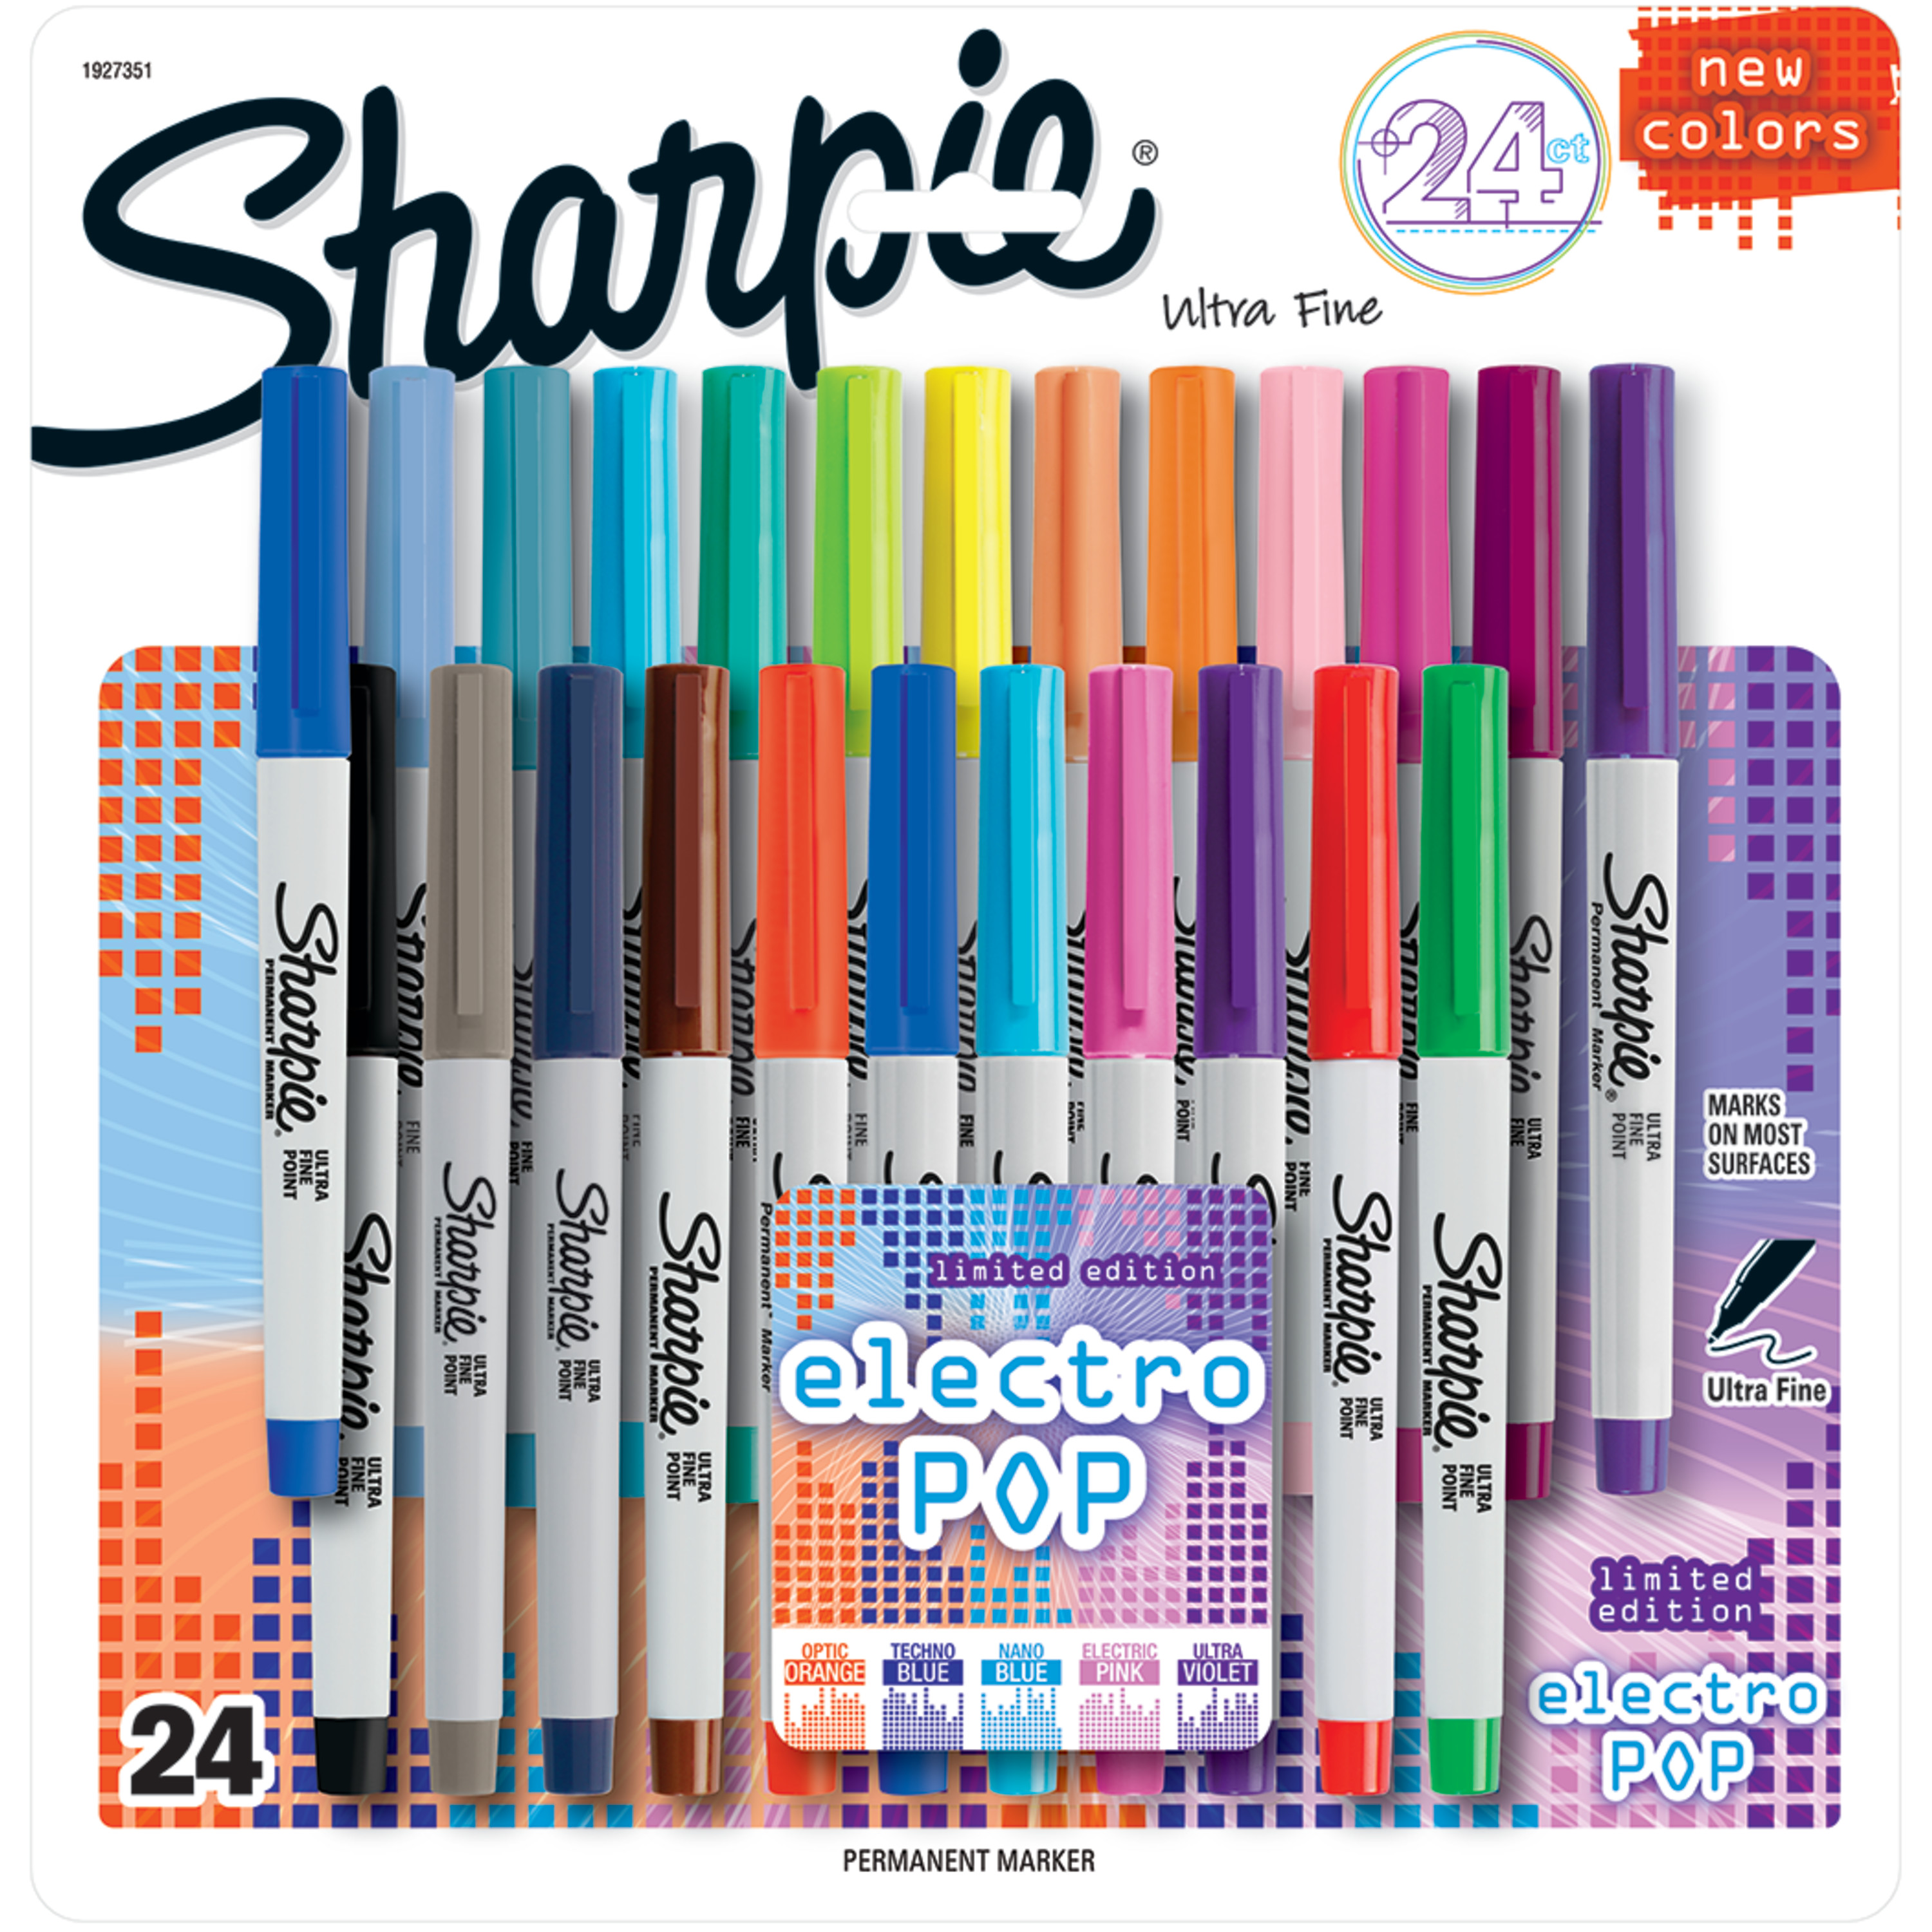 Sharpie Electro Pop Permanent Markers, Ultra Fine Point, Assorted Colors, 24 Count - image 1 of 8